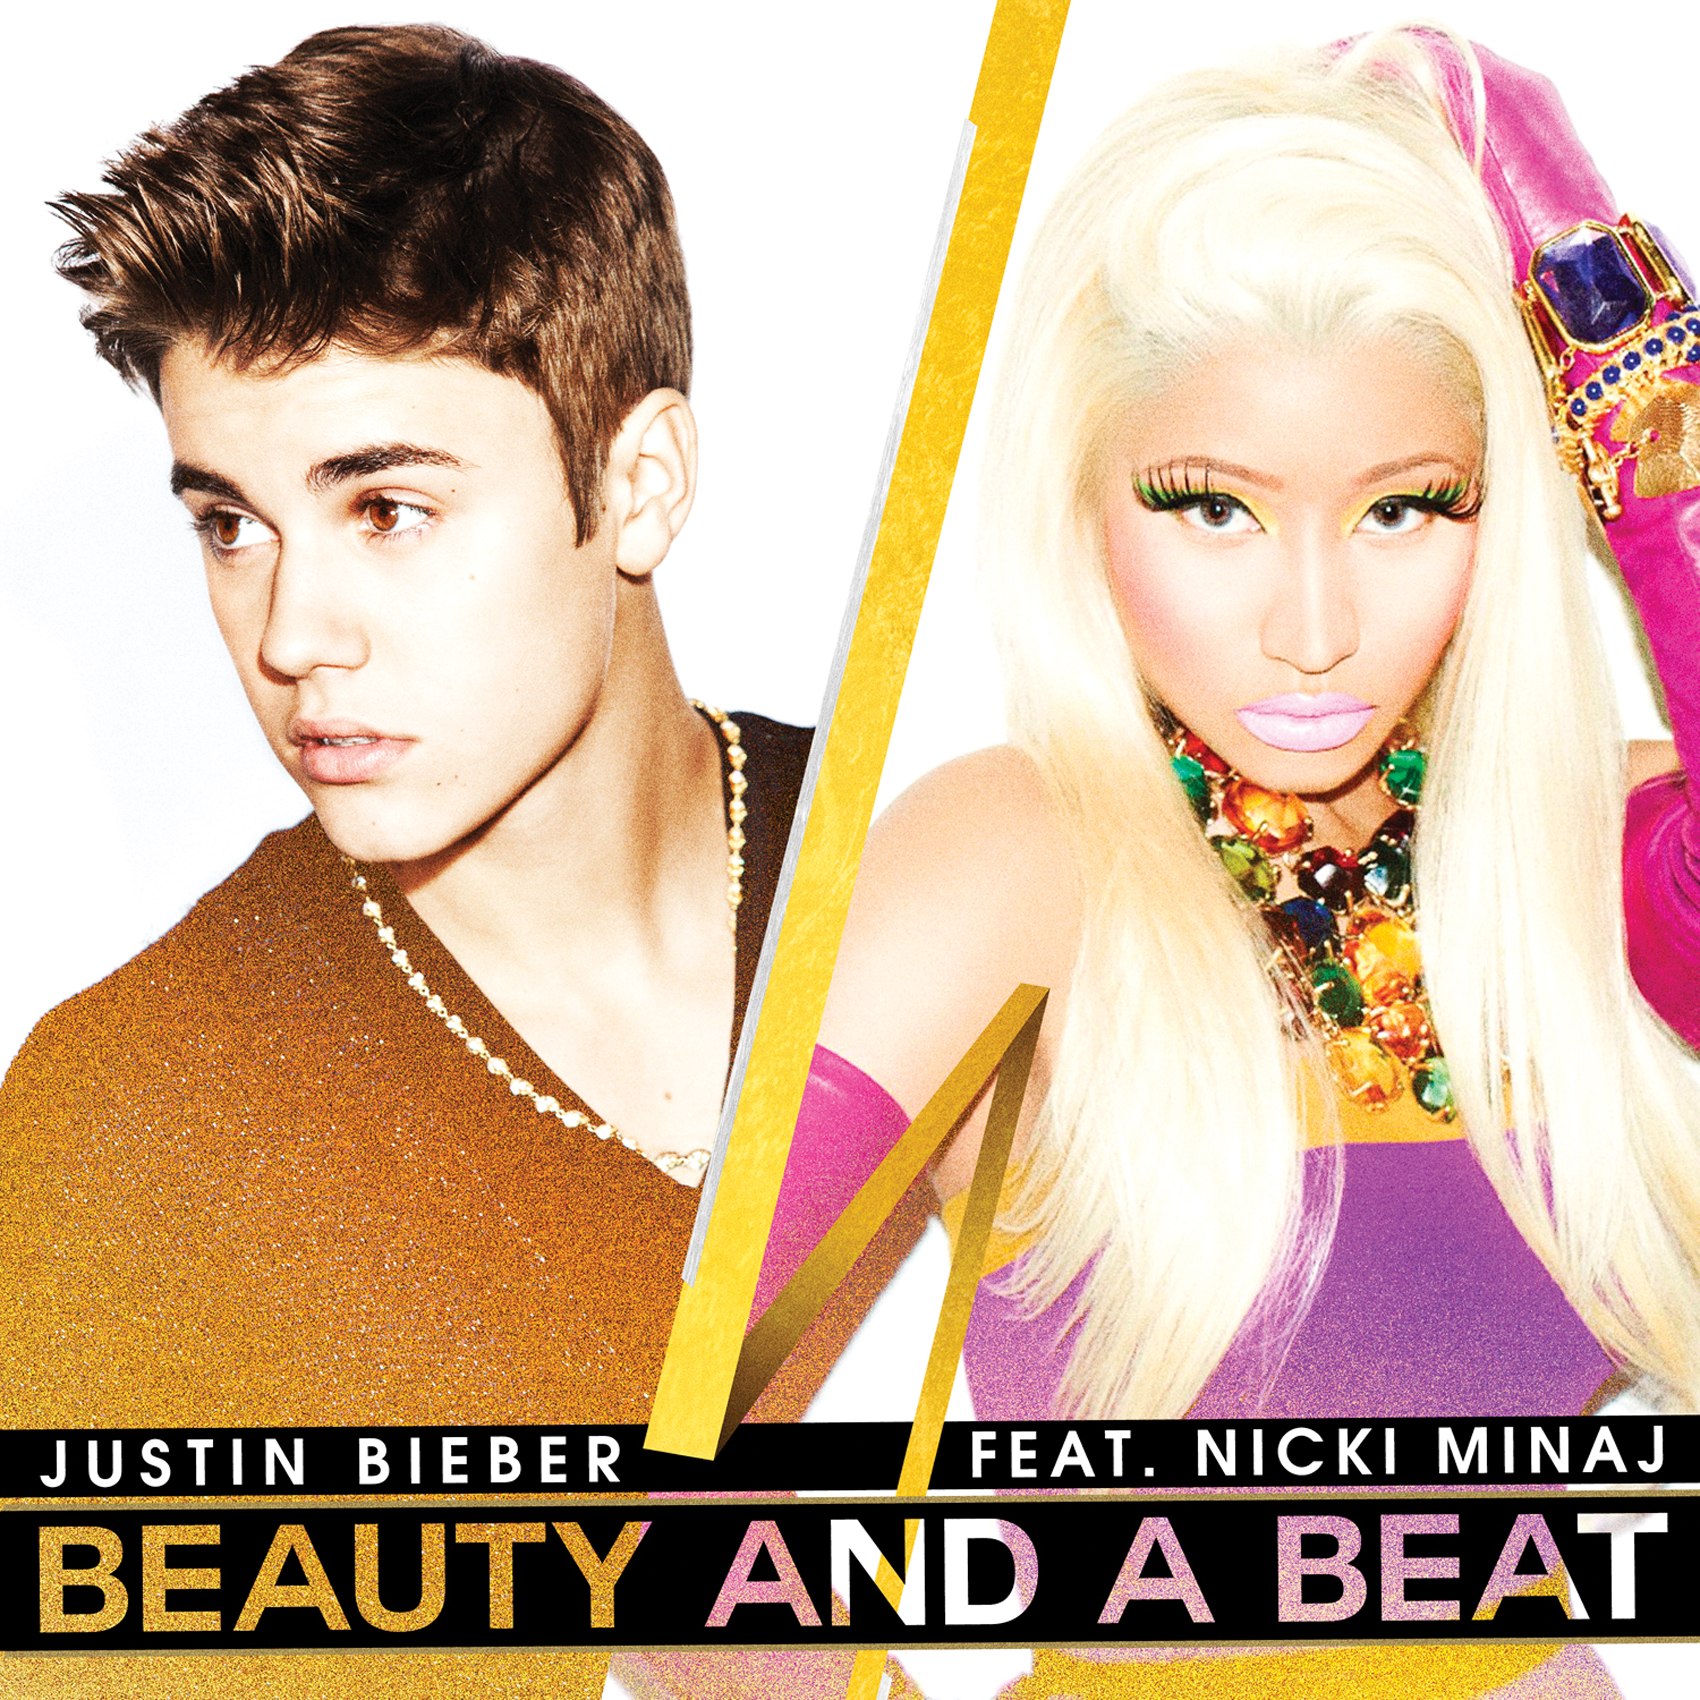 Download justin bieber beauty and the beast